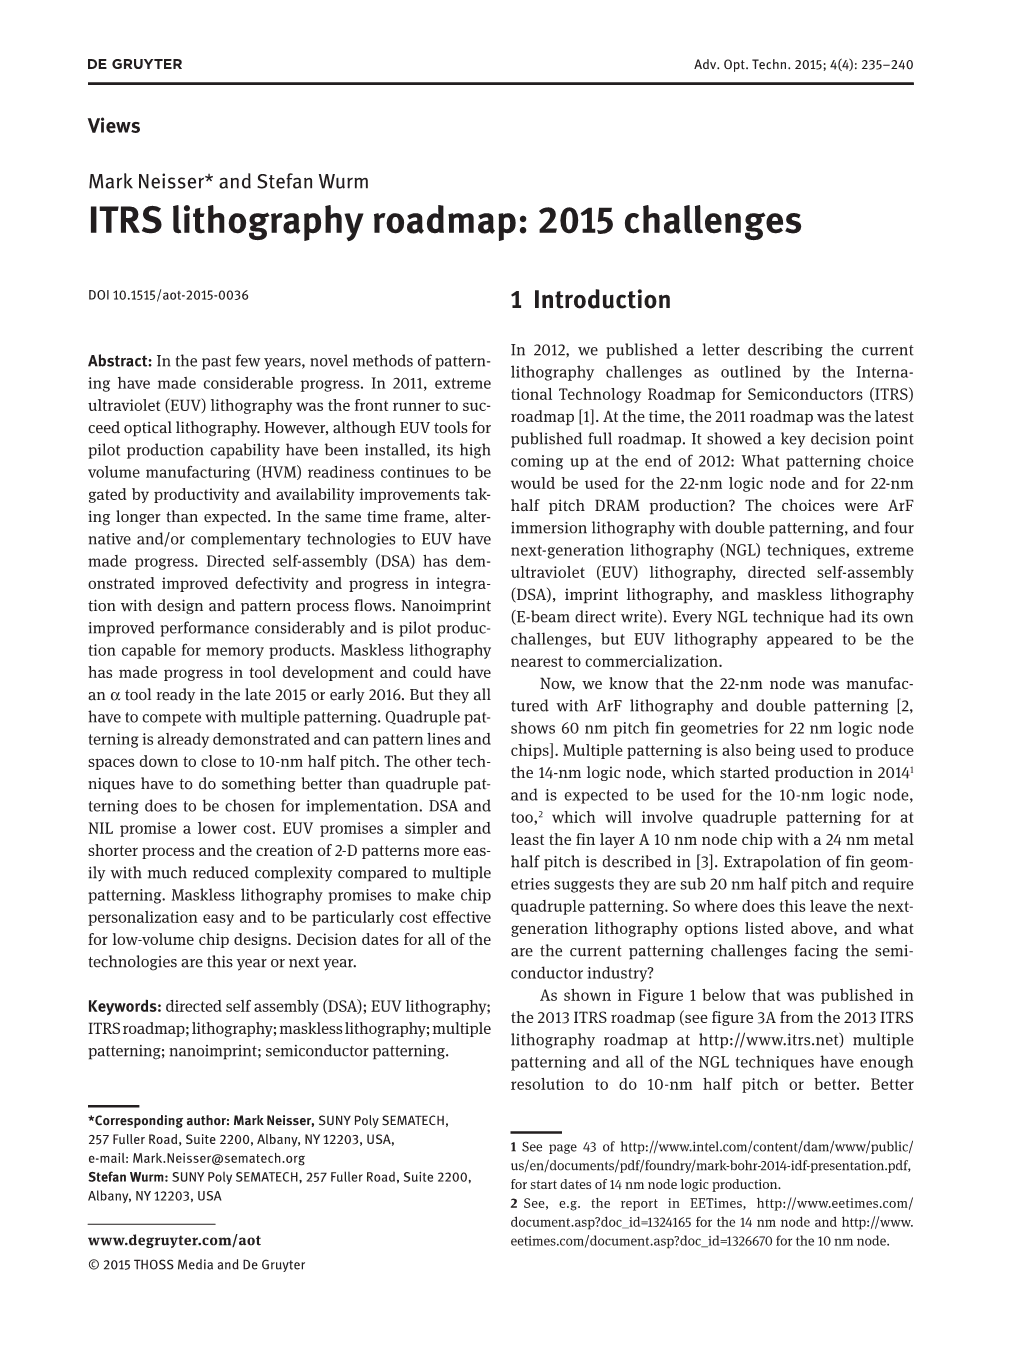 ITRS Lithography Roadmap: 2015 Challenges